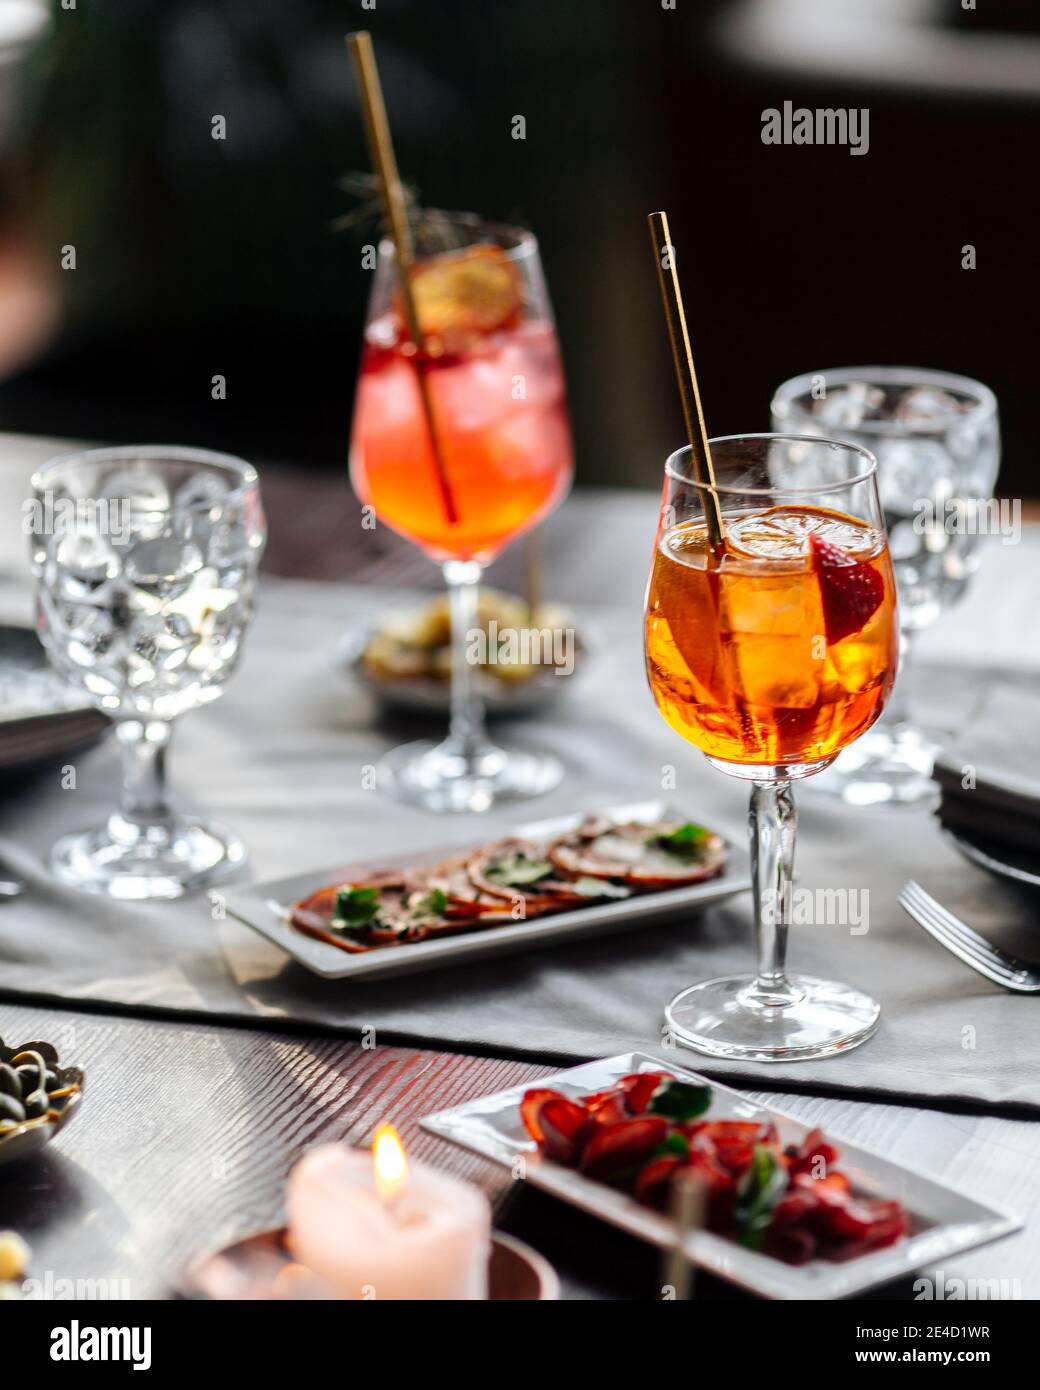 Aperol spritz cocktails on the served table Stock Photo